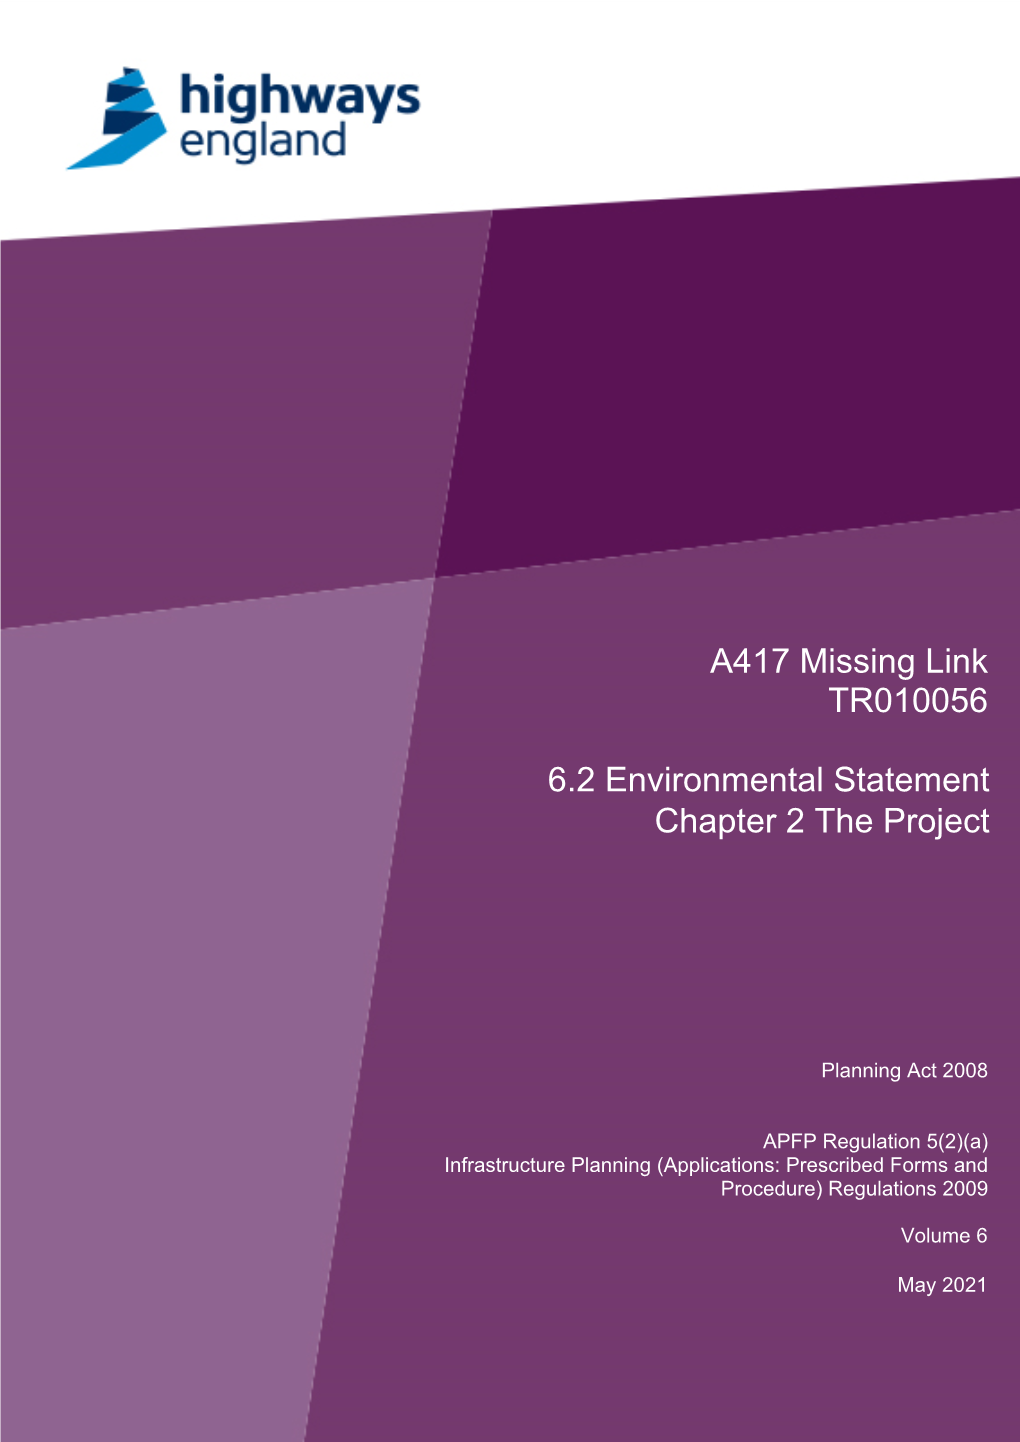 A417 Missing Link TR010056 6.2 Environmental Statement Chapter 2